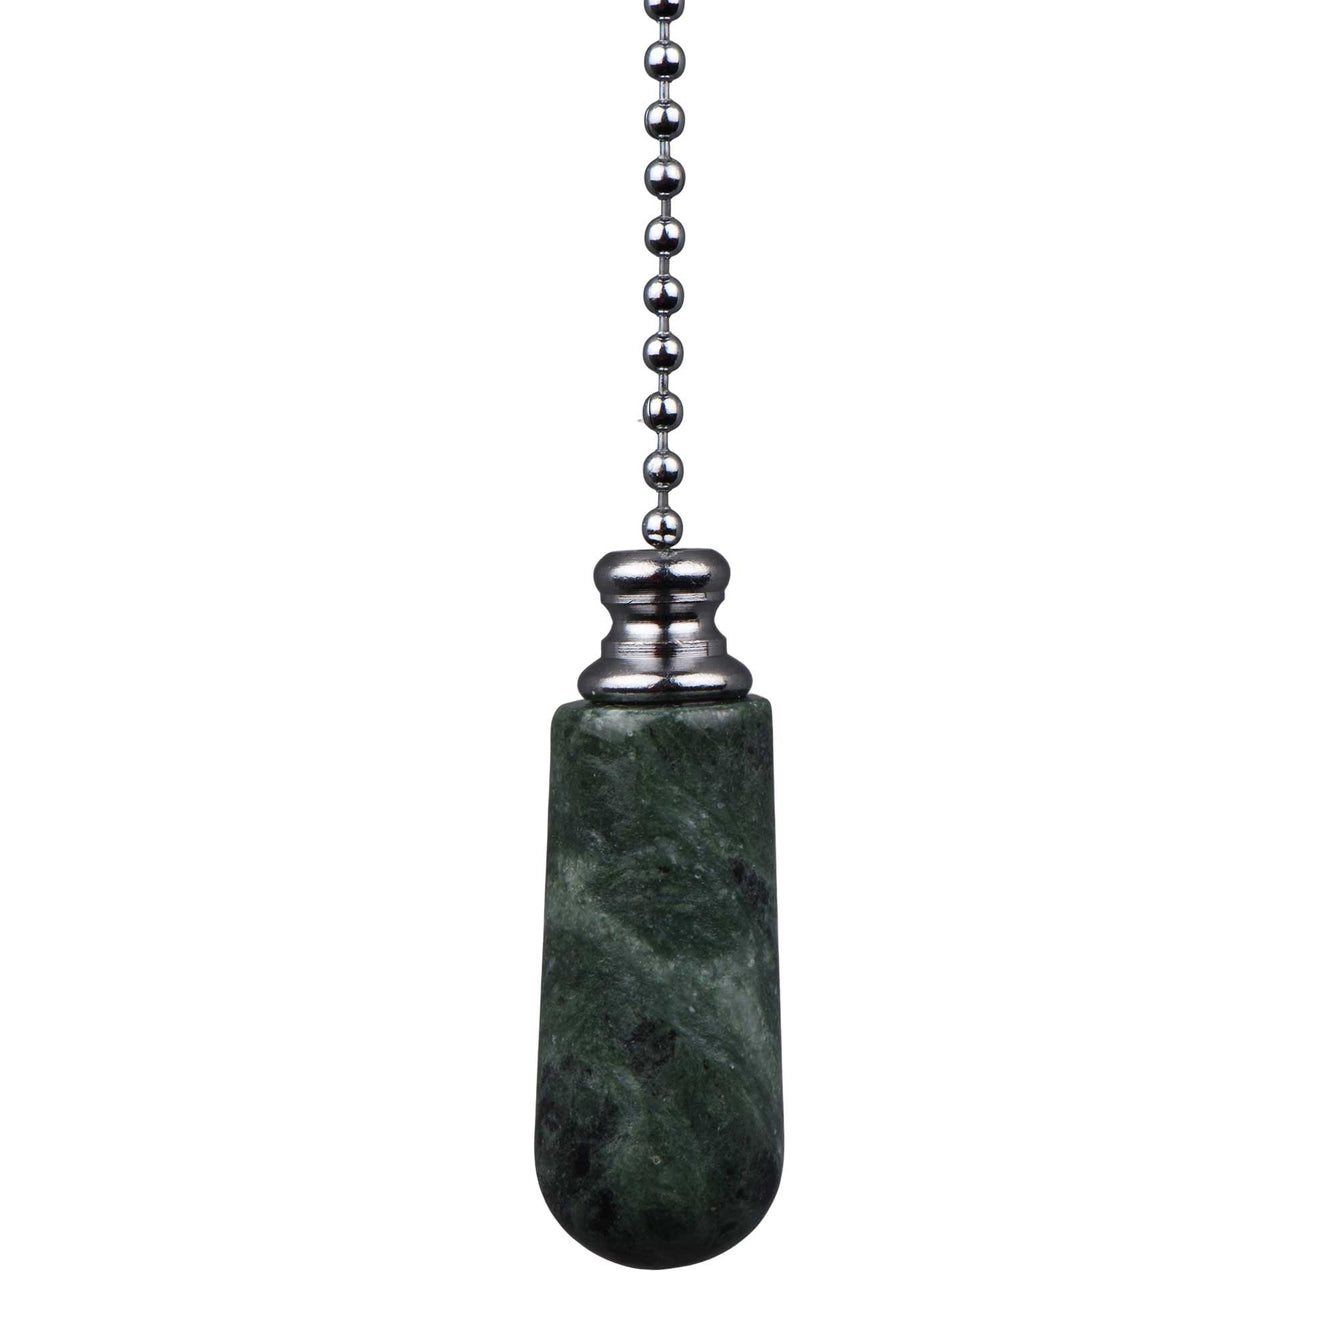 ElekTek Light Pull Chain Marble Drop With 80cm Matching Chain Green